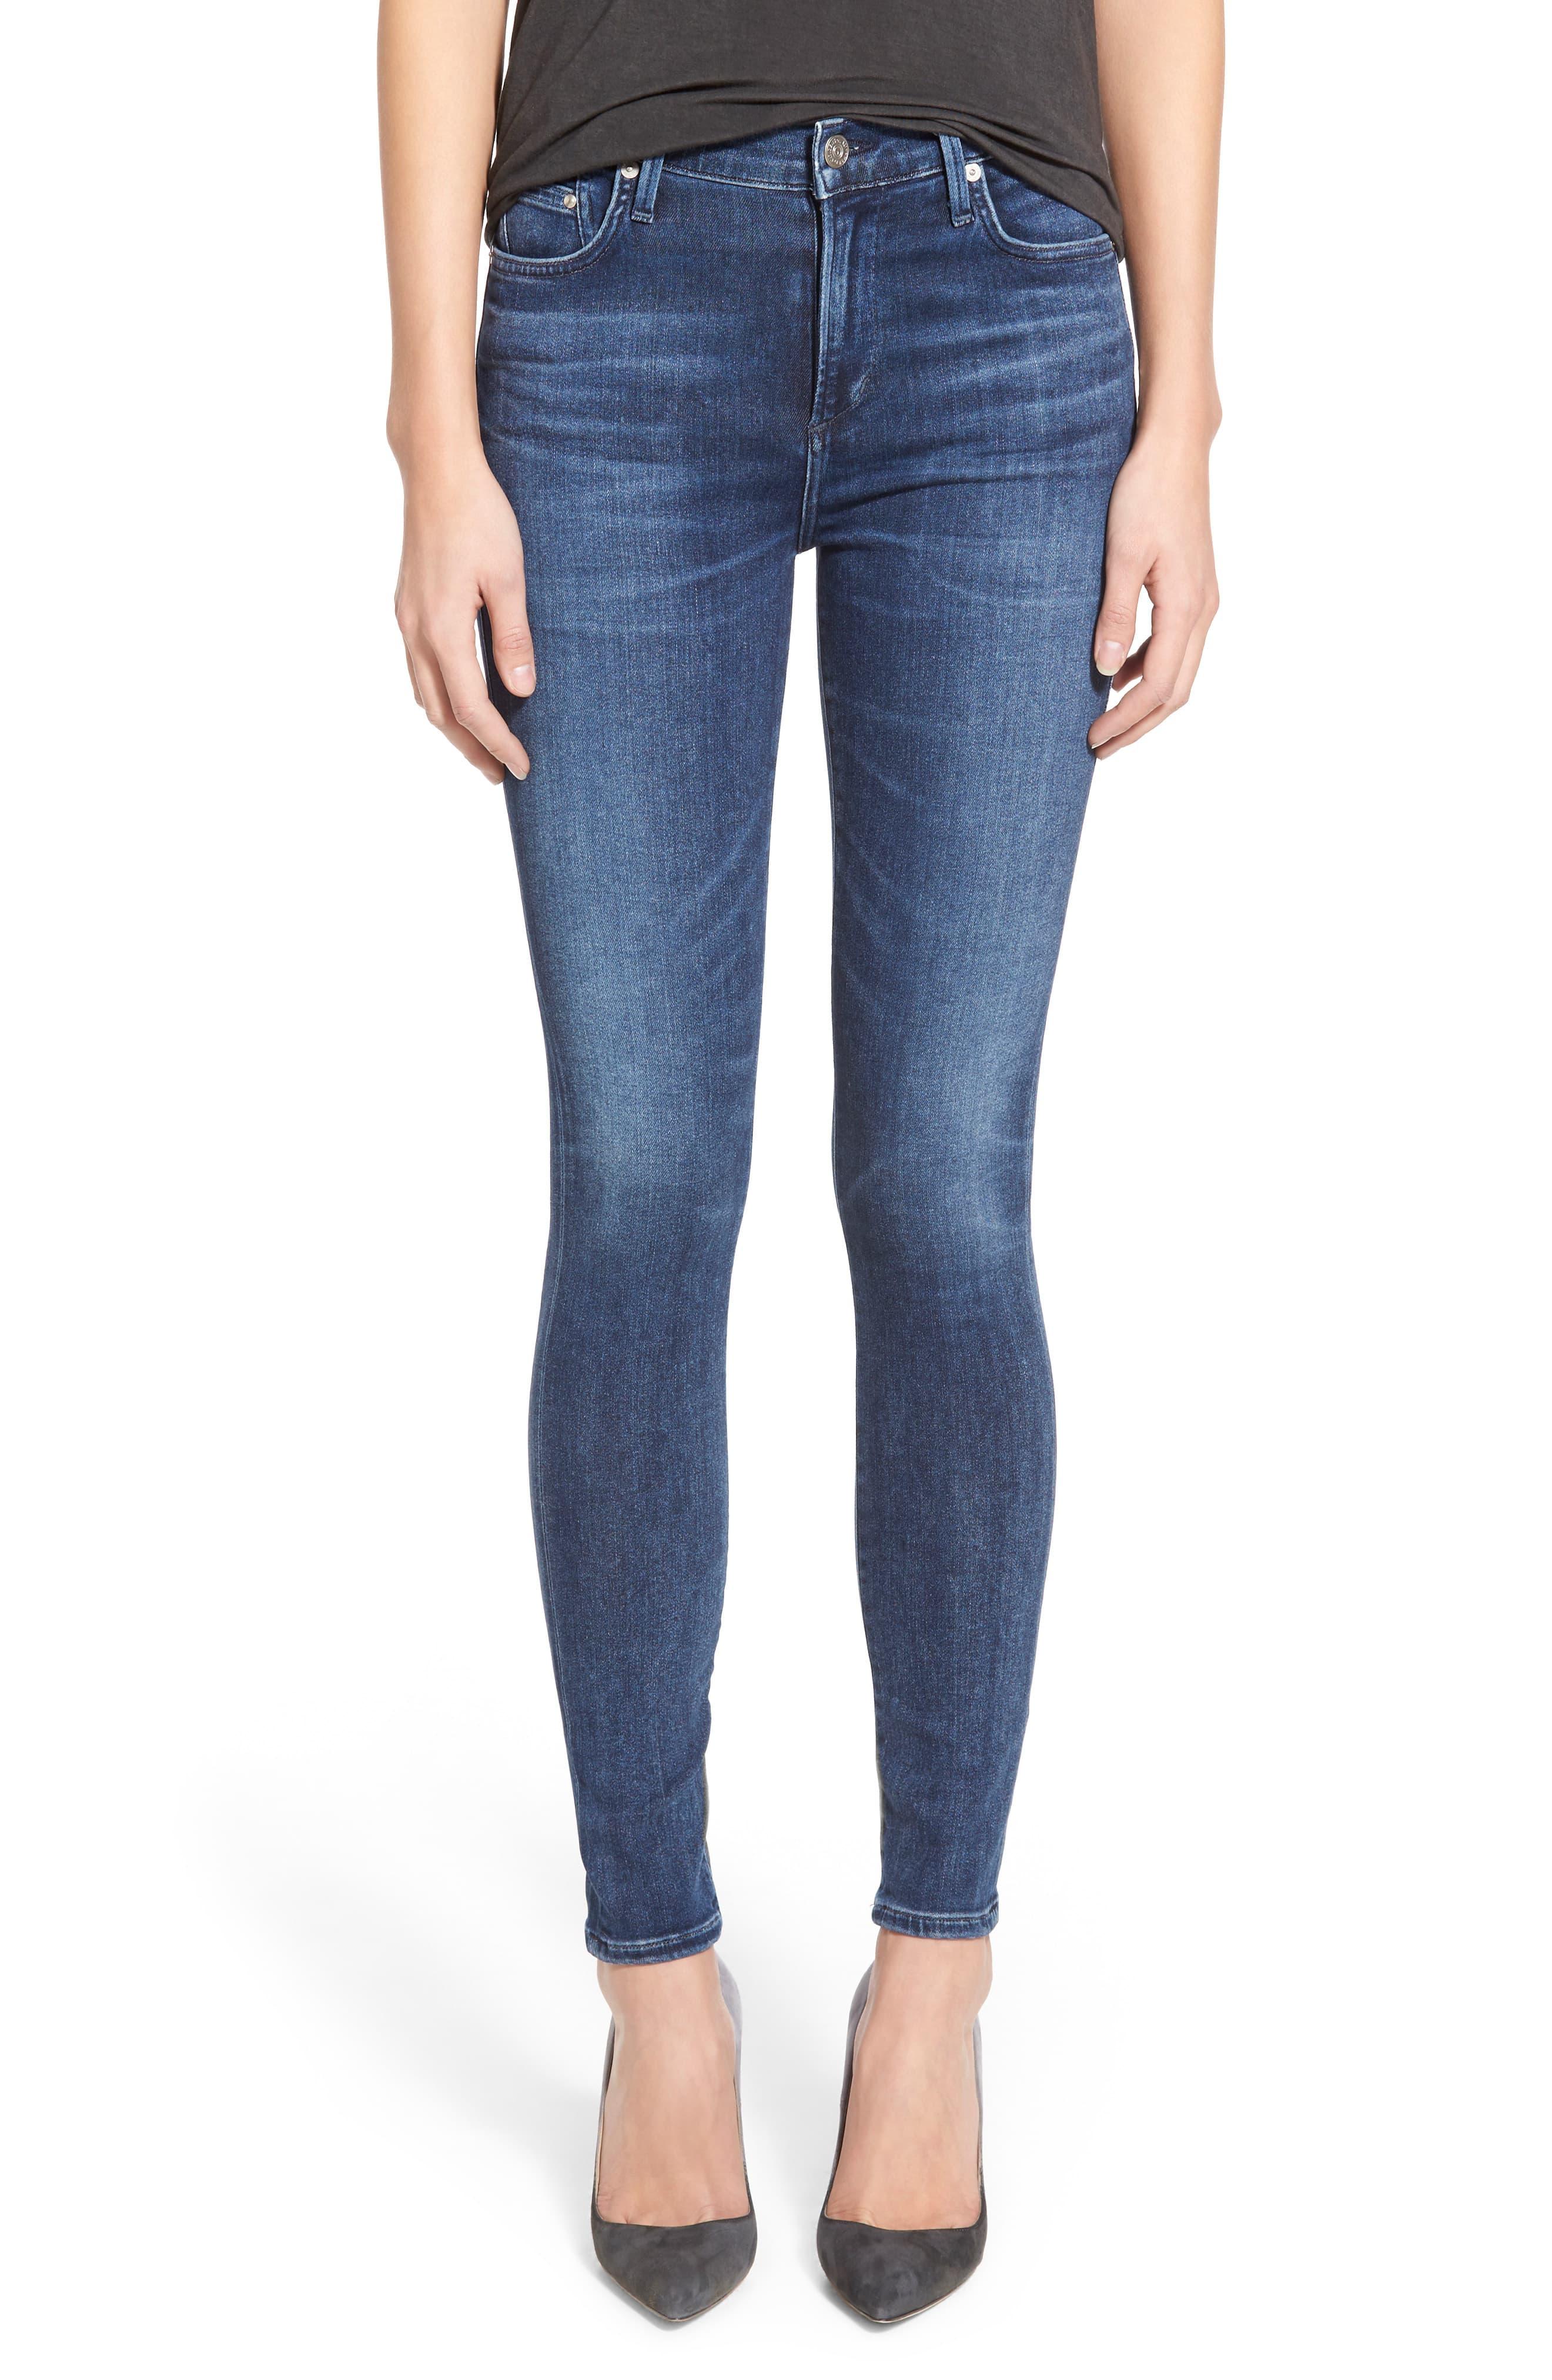 Citizens of Humanity Sculpt - Rocket High Waist Skinny Jeans in Blue - Lyst